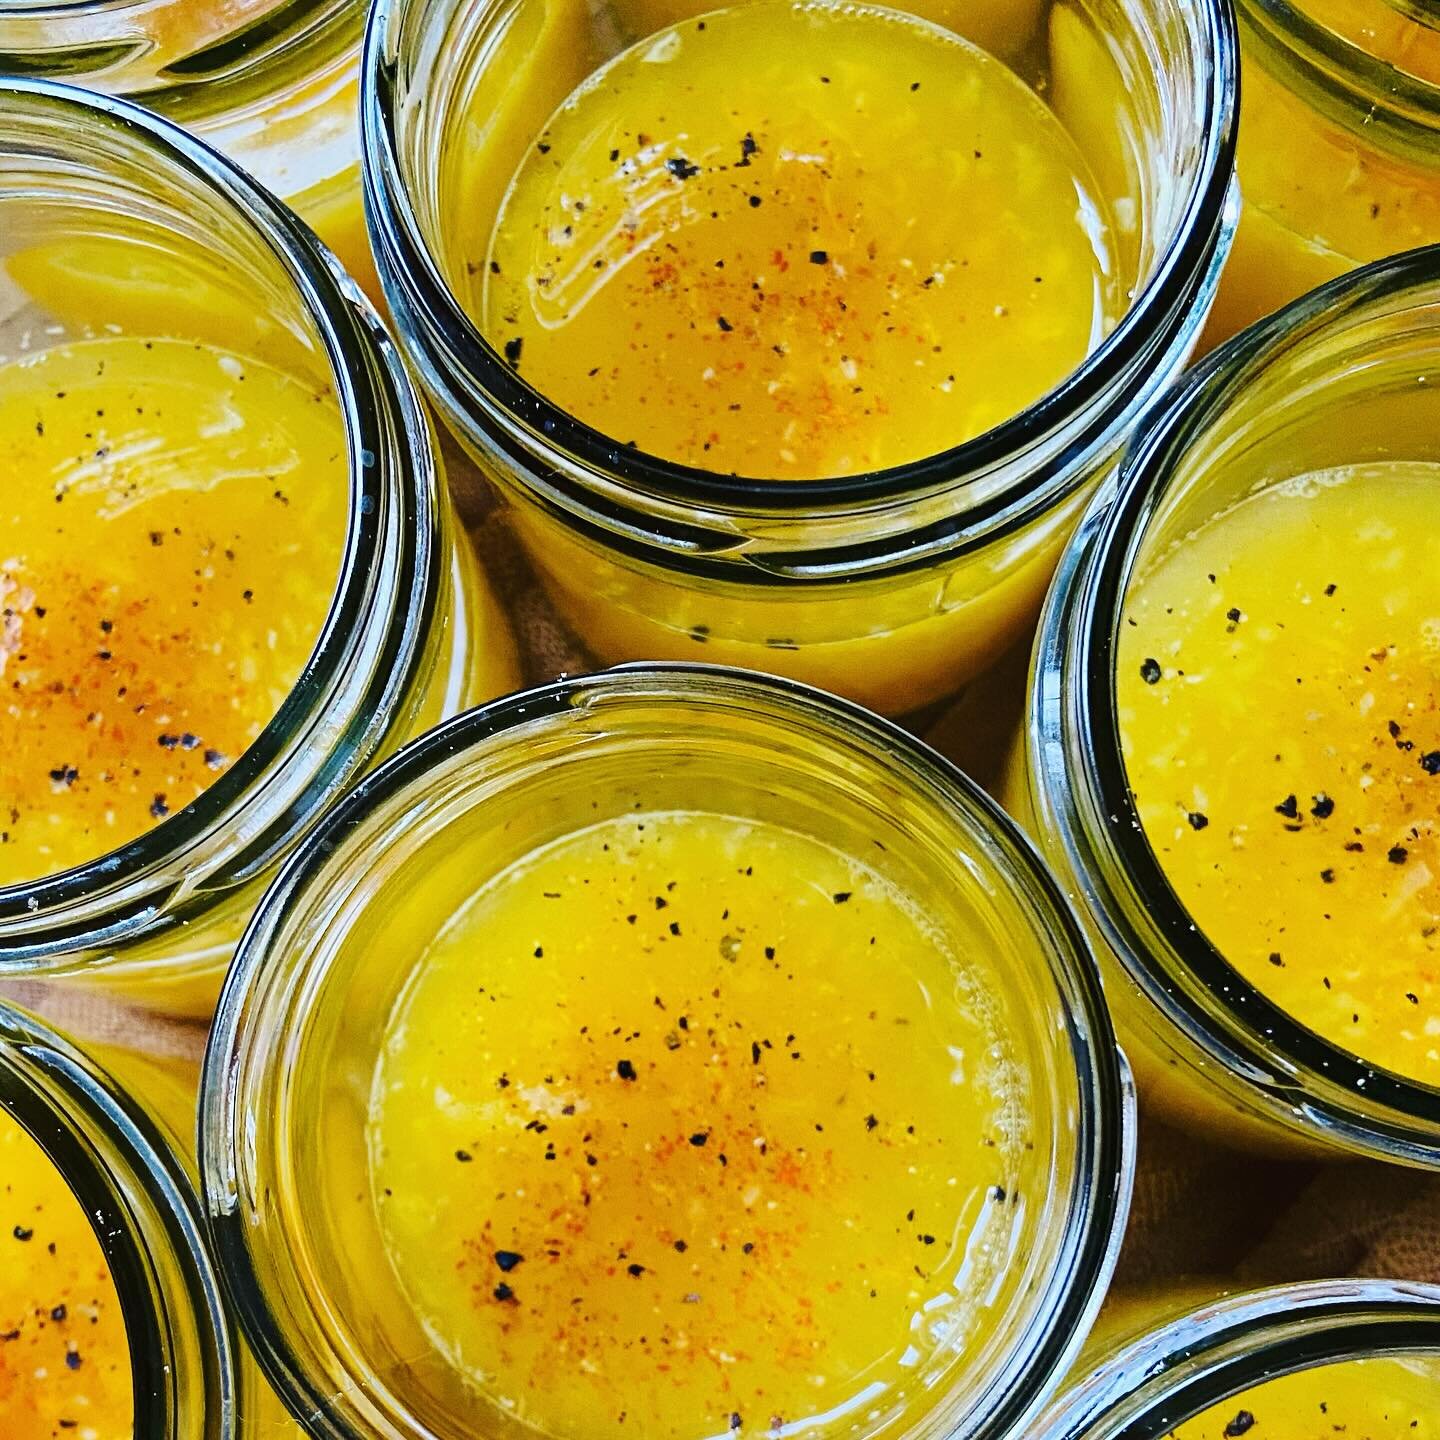 Taste the sunshine! ☀️ what a difference some sun can make.
Our St Clements shots are a real kickstart to your day with ginger, turmeric &amp; cayenne. Available for your private dining brunch or wellness retreat. 😋
.
.
.
#feelgoodfood #devonyoga #n